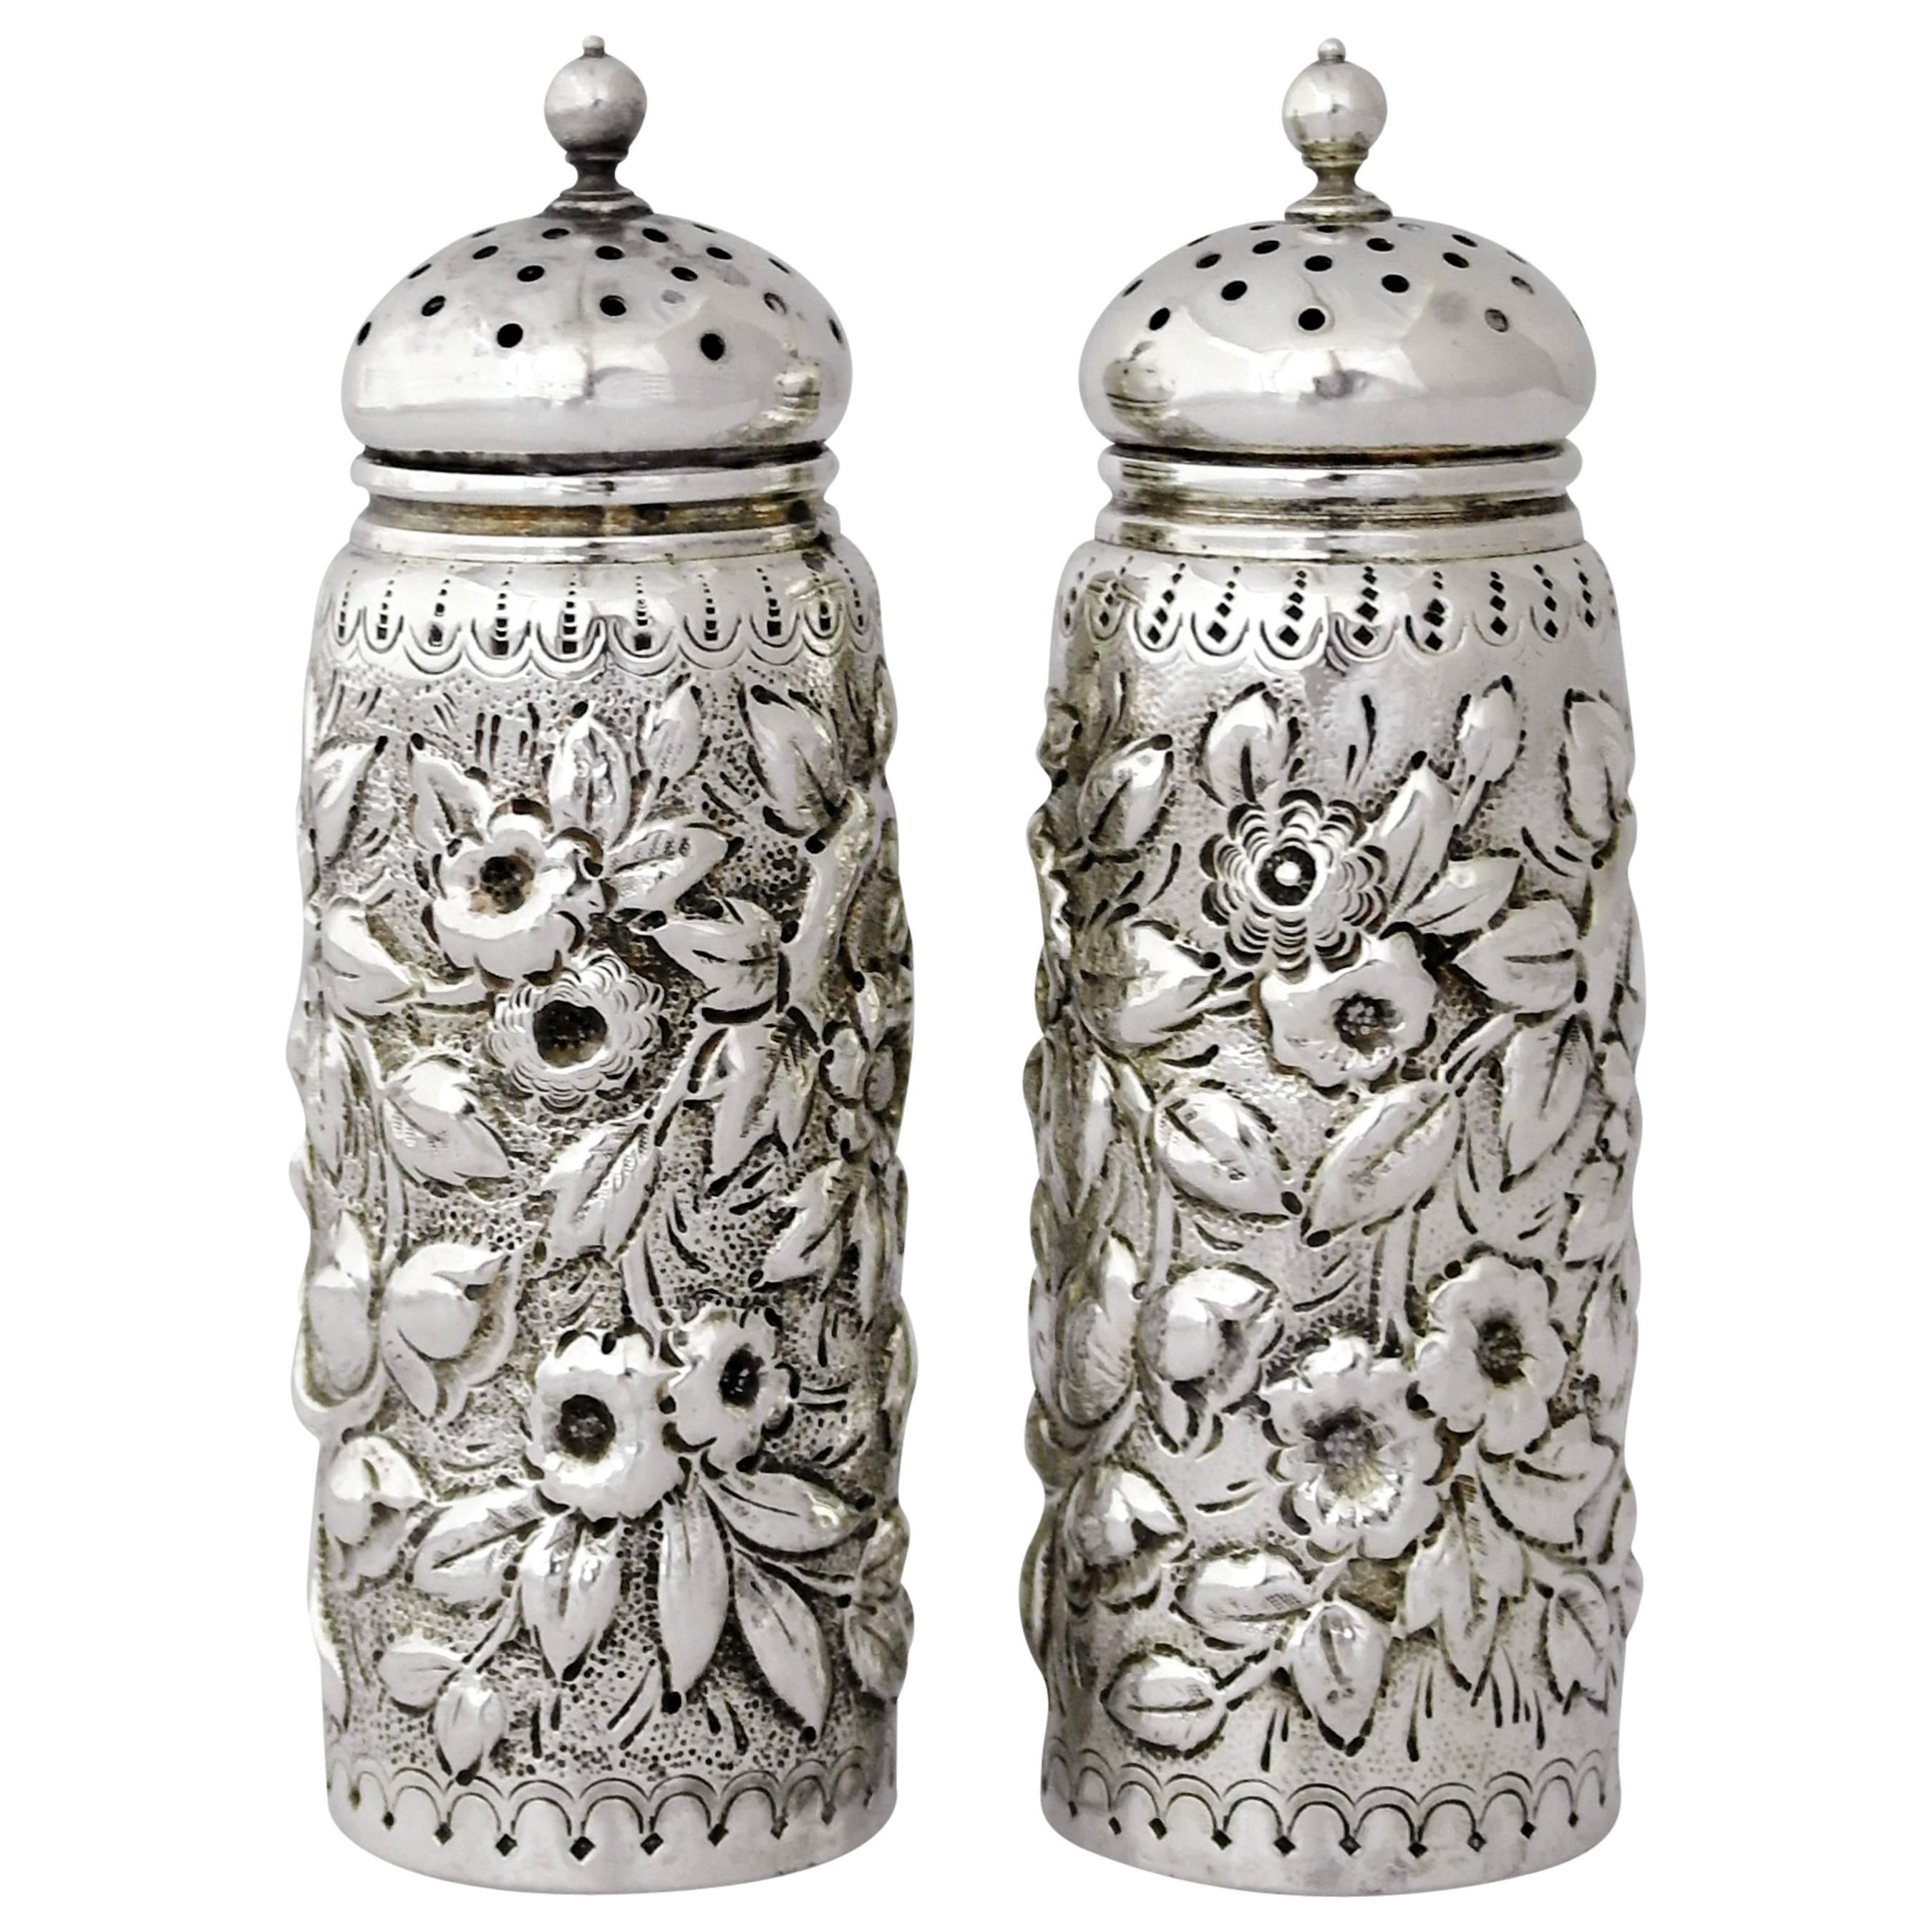 Dominick & Haff Sterling Silver Hand Chased Salt and Pepper Shakers